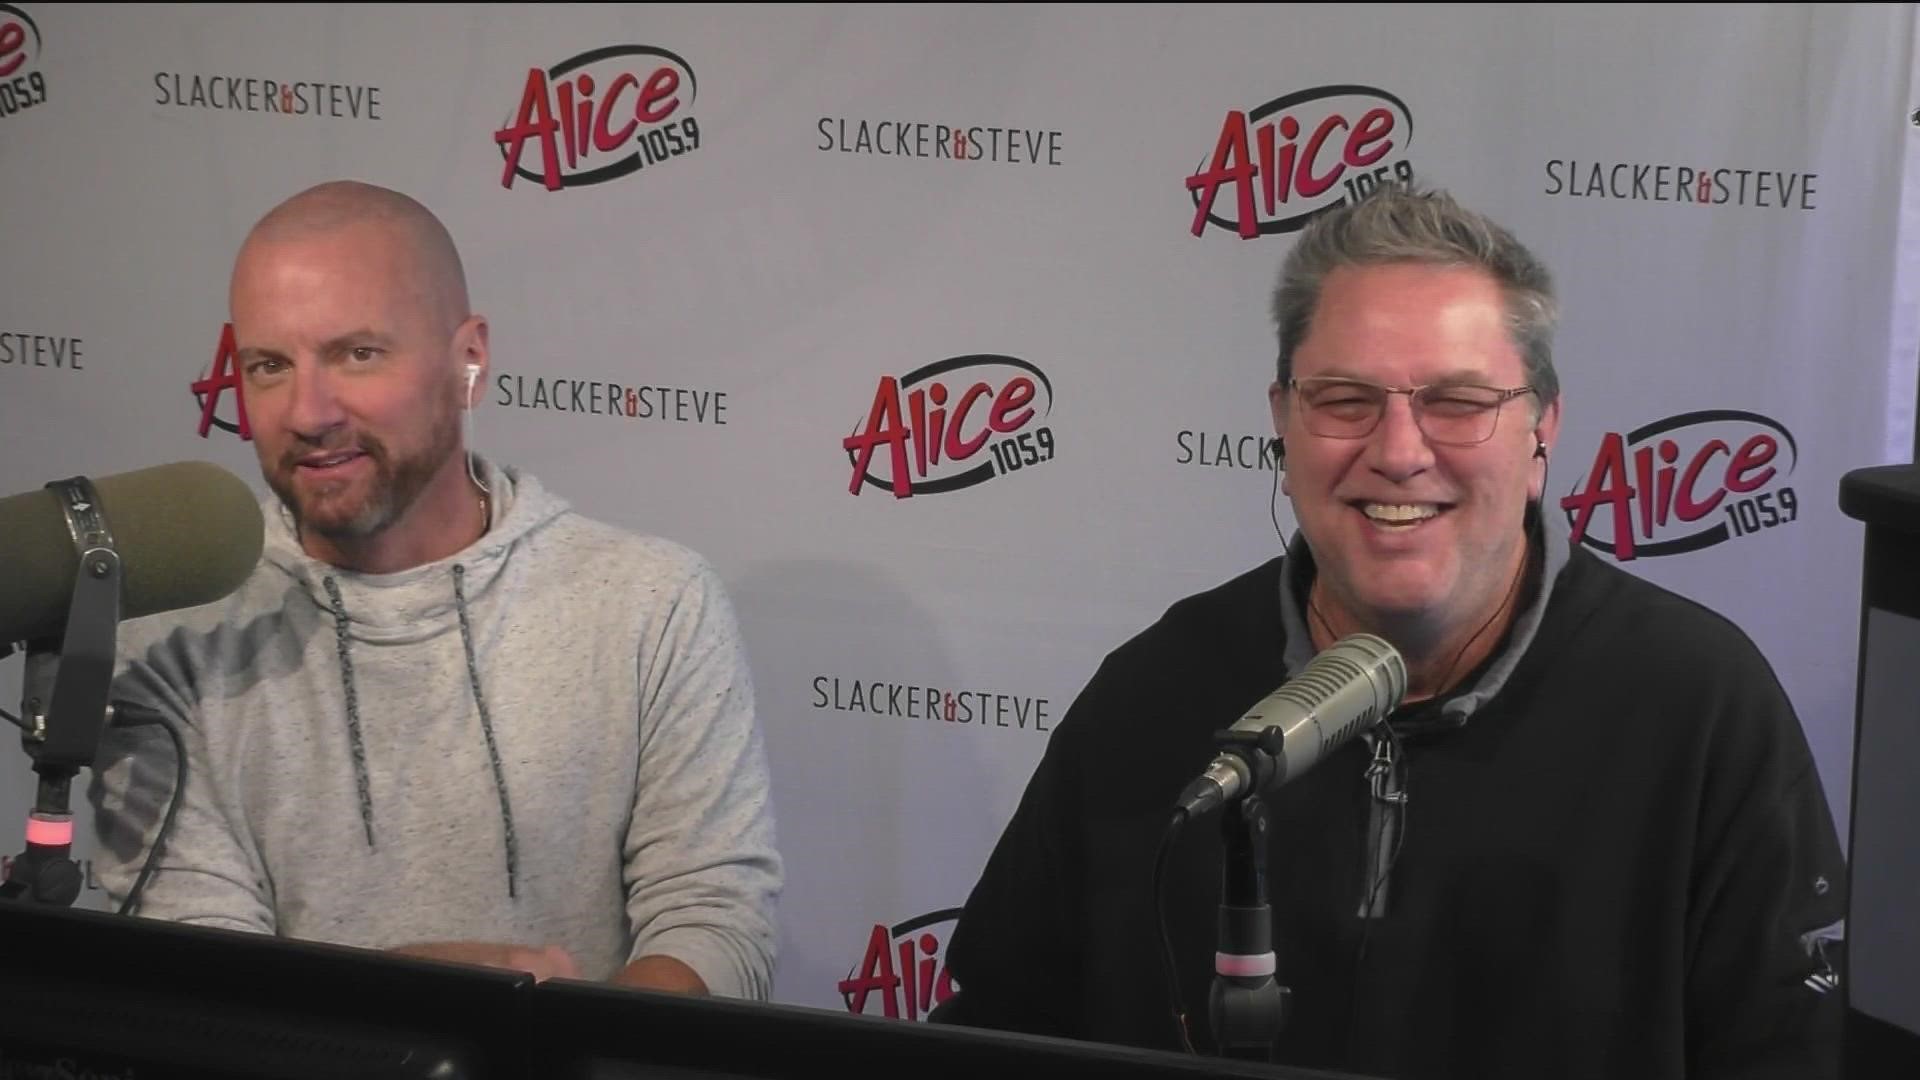 Slacker and Steve announced Monday their show on radio station Alice 105.9 will be ending after nearly 18 years.